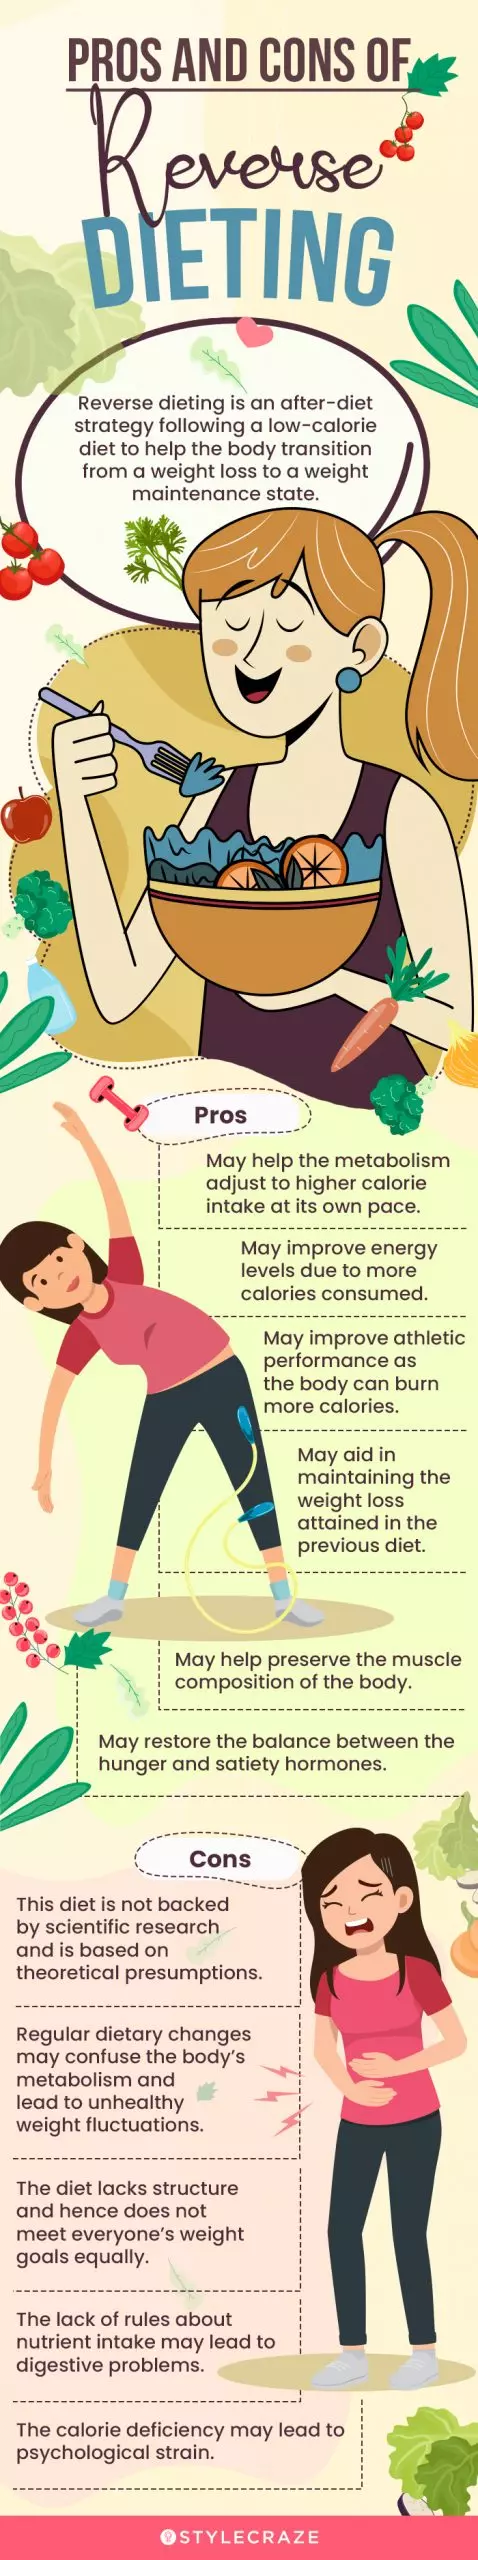 pros and cons of reverse dieting (infographic)